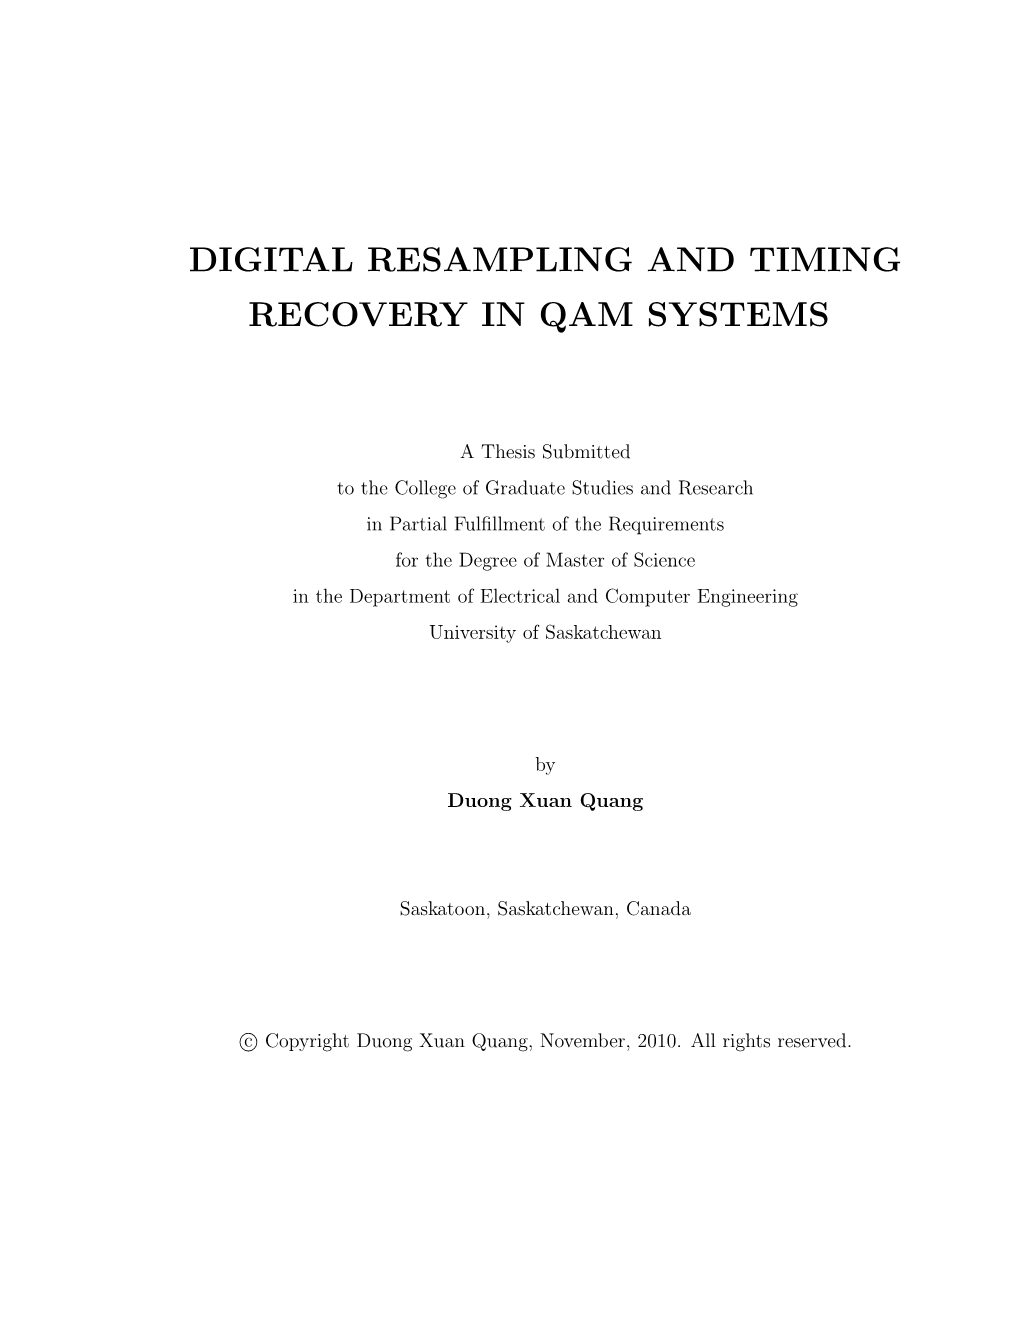 Digital Resampling and Timing Recovery in Qam Systems